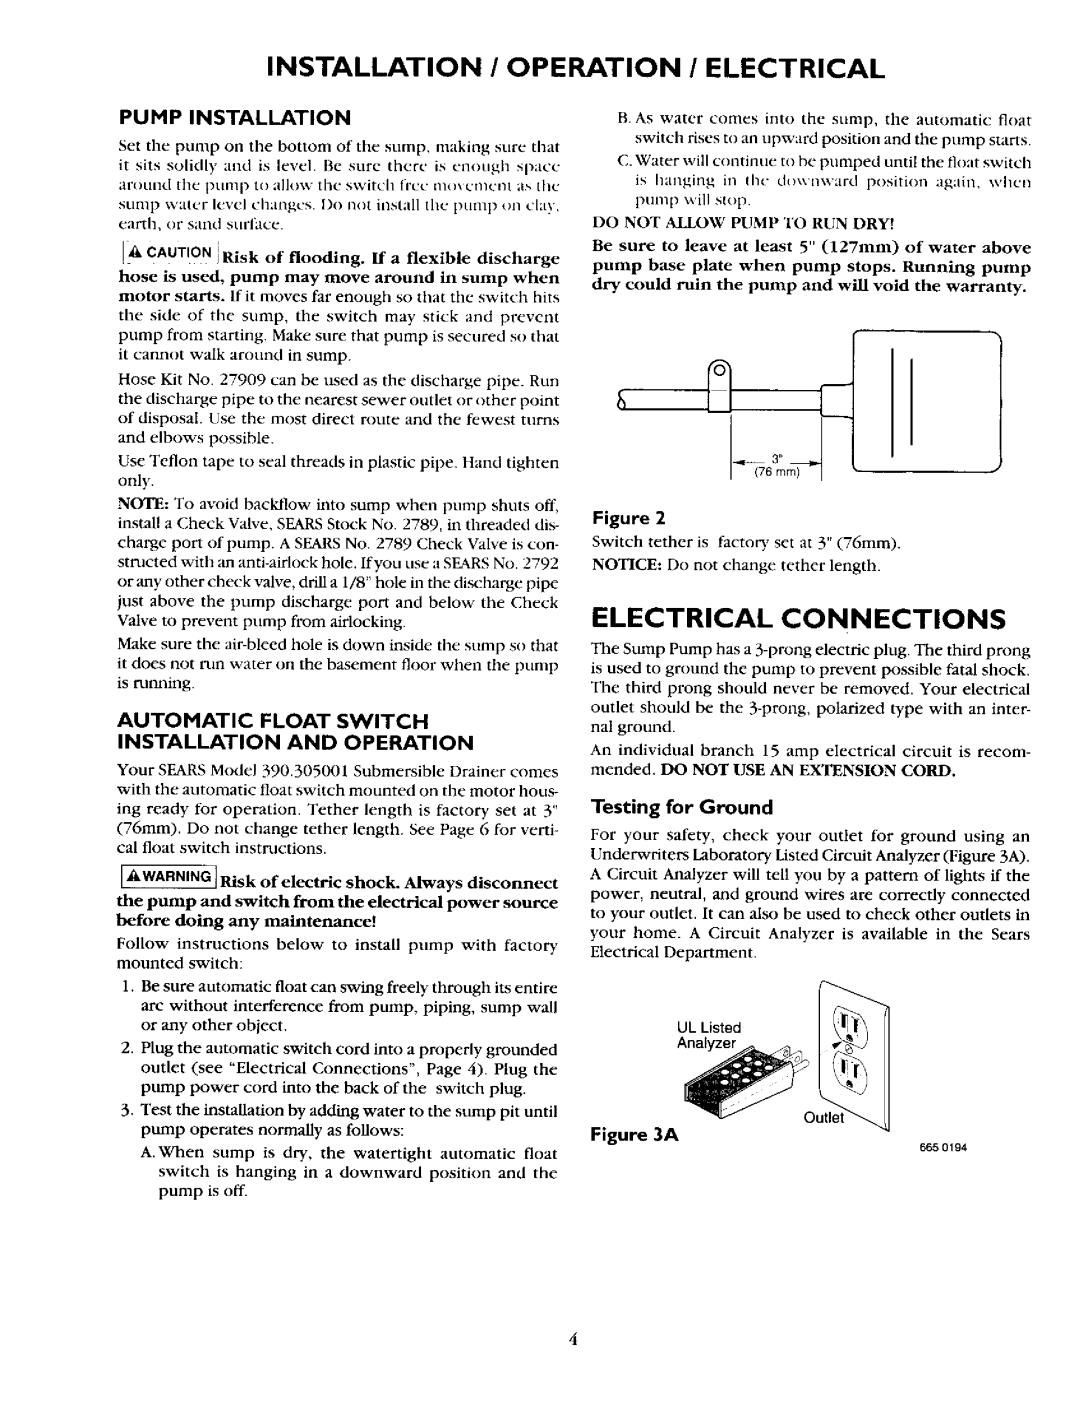 Sears 390.304692 Electrical Connections, Installation / Operation / Electrical, Pump Installation, I CAUTION IRisk 